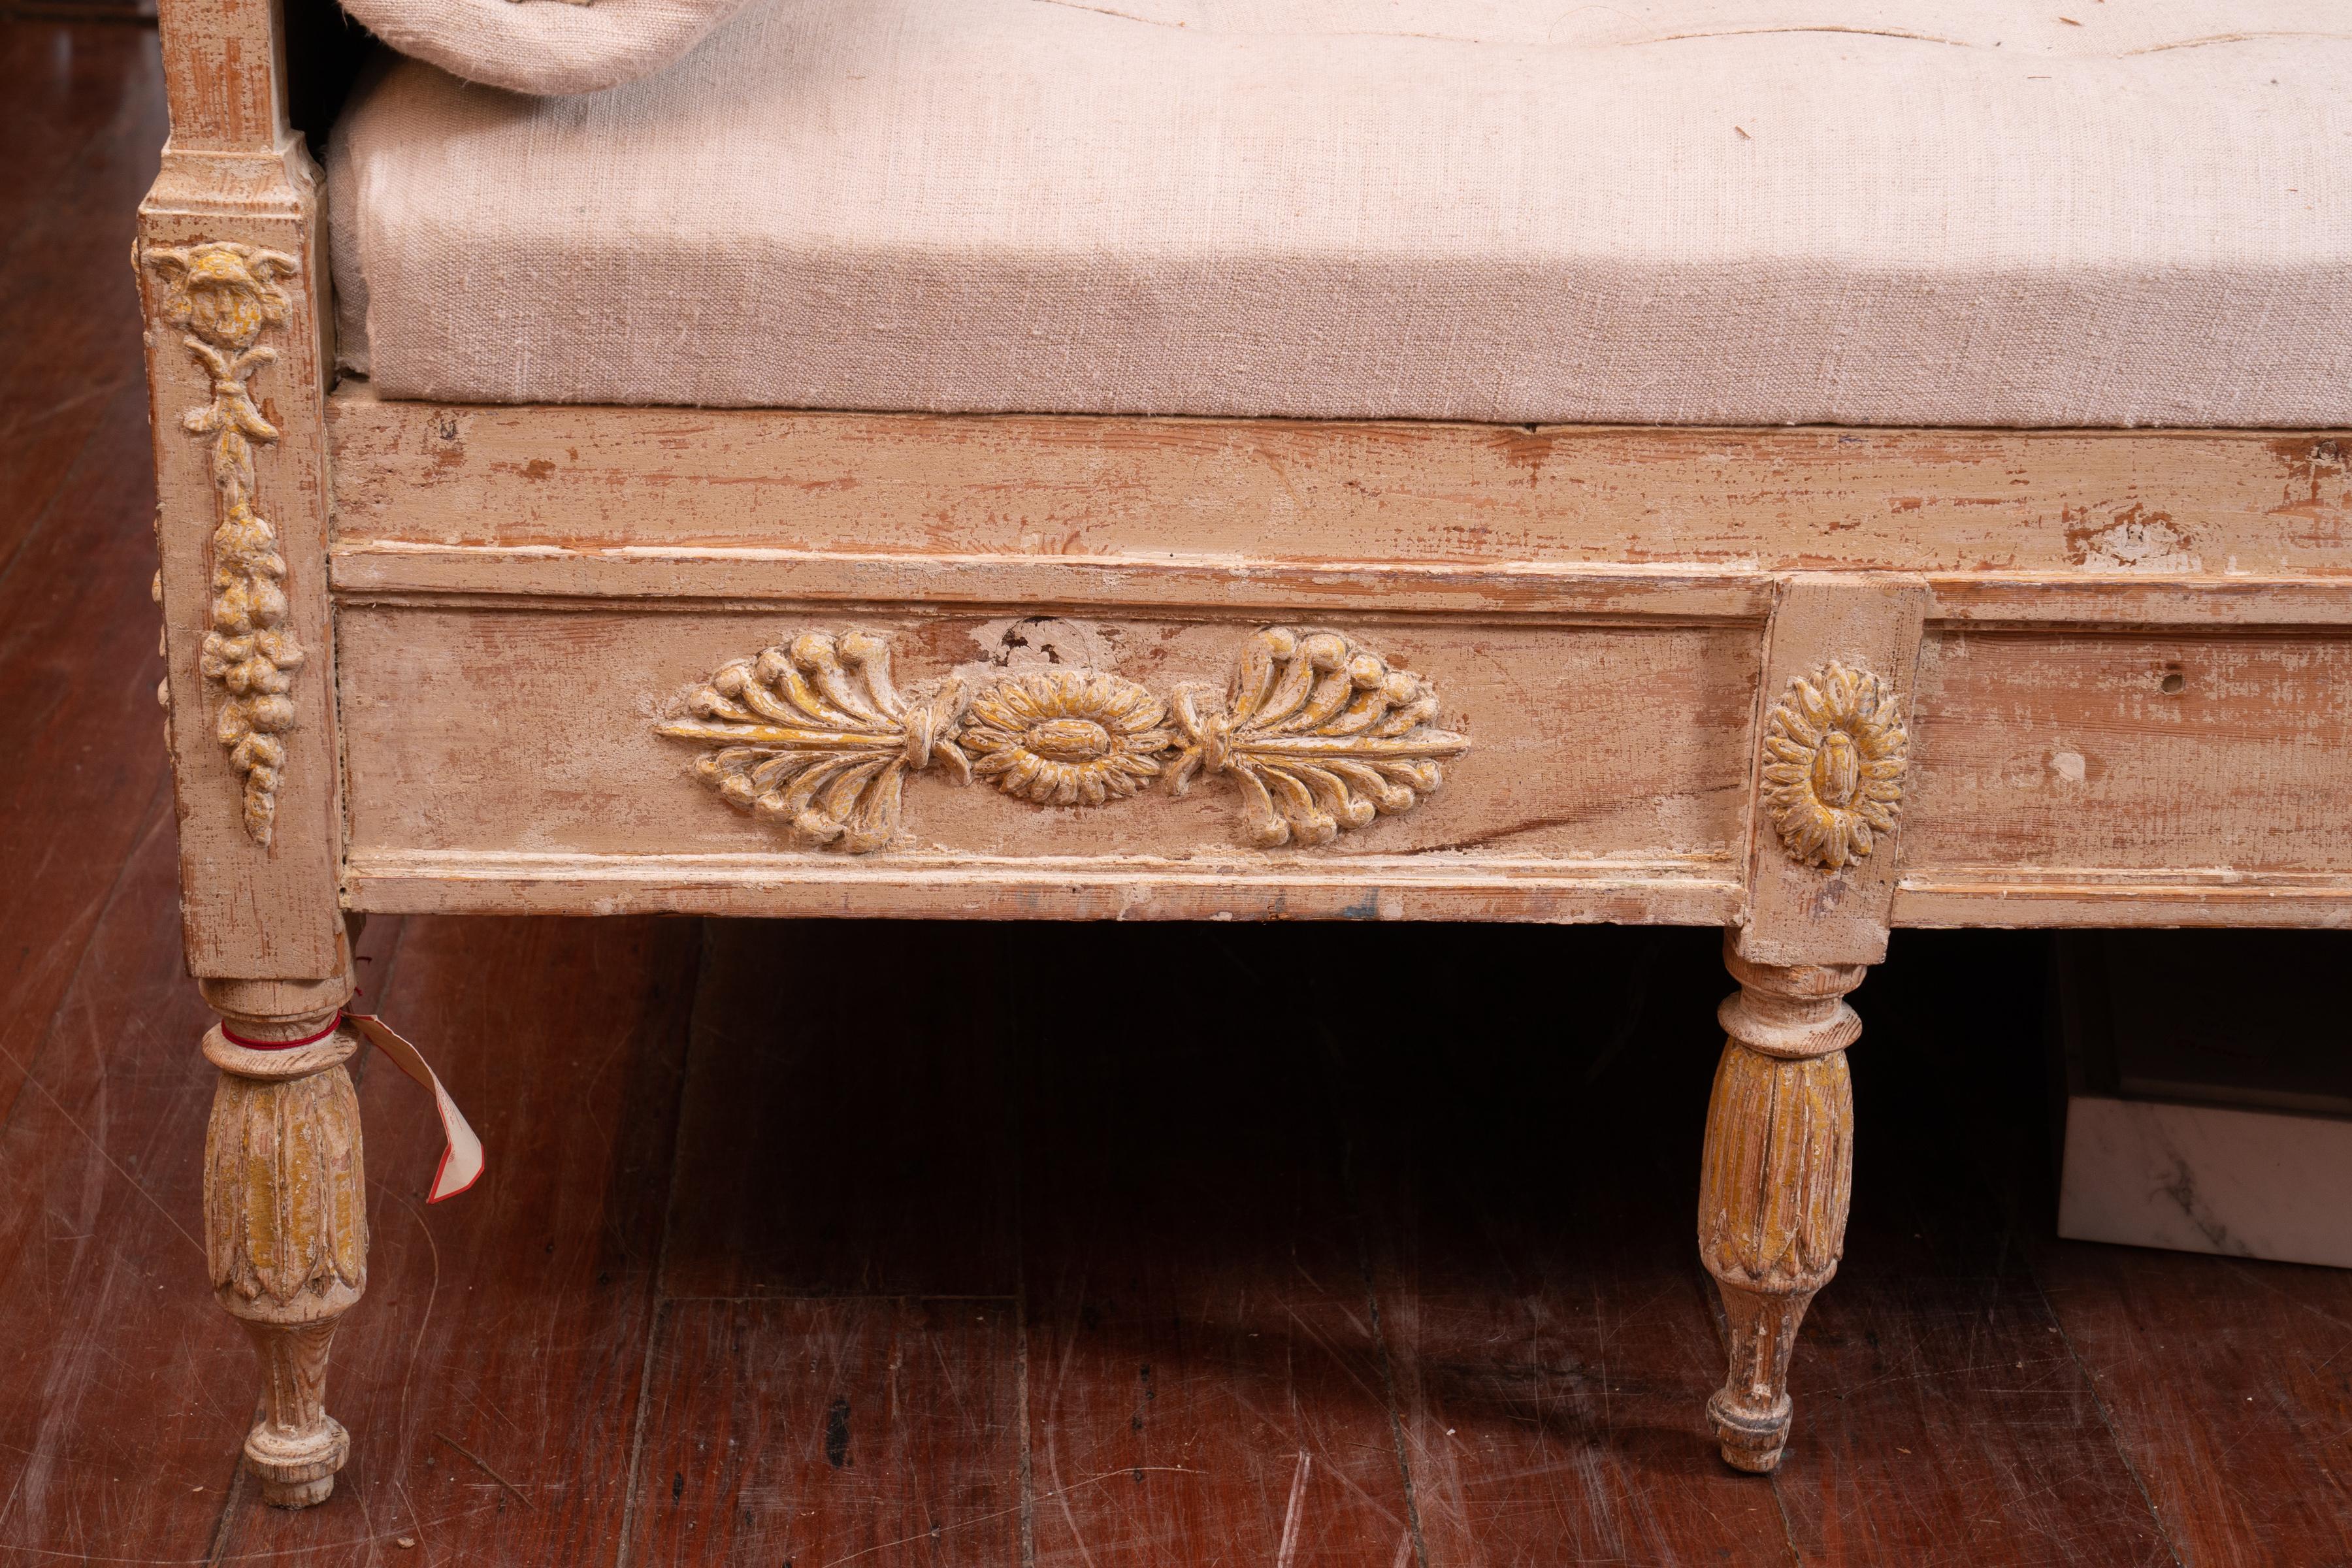 Wonderfully carved Gustavian sofa with original painted surface.